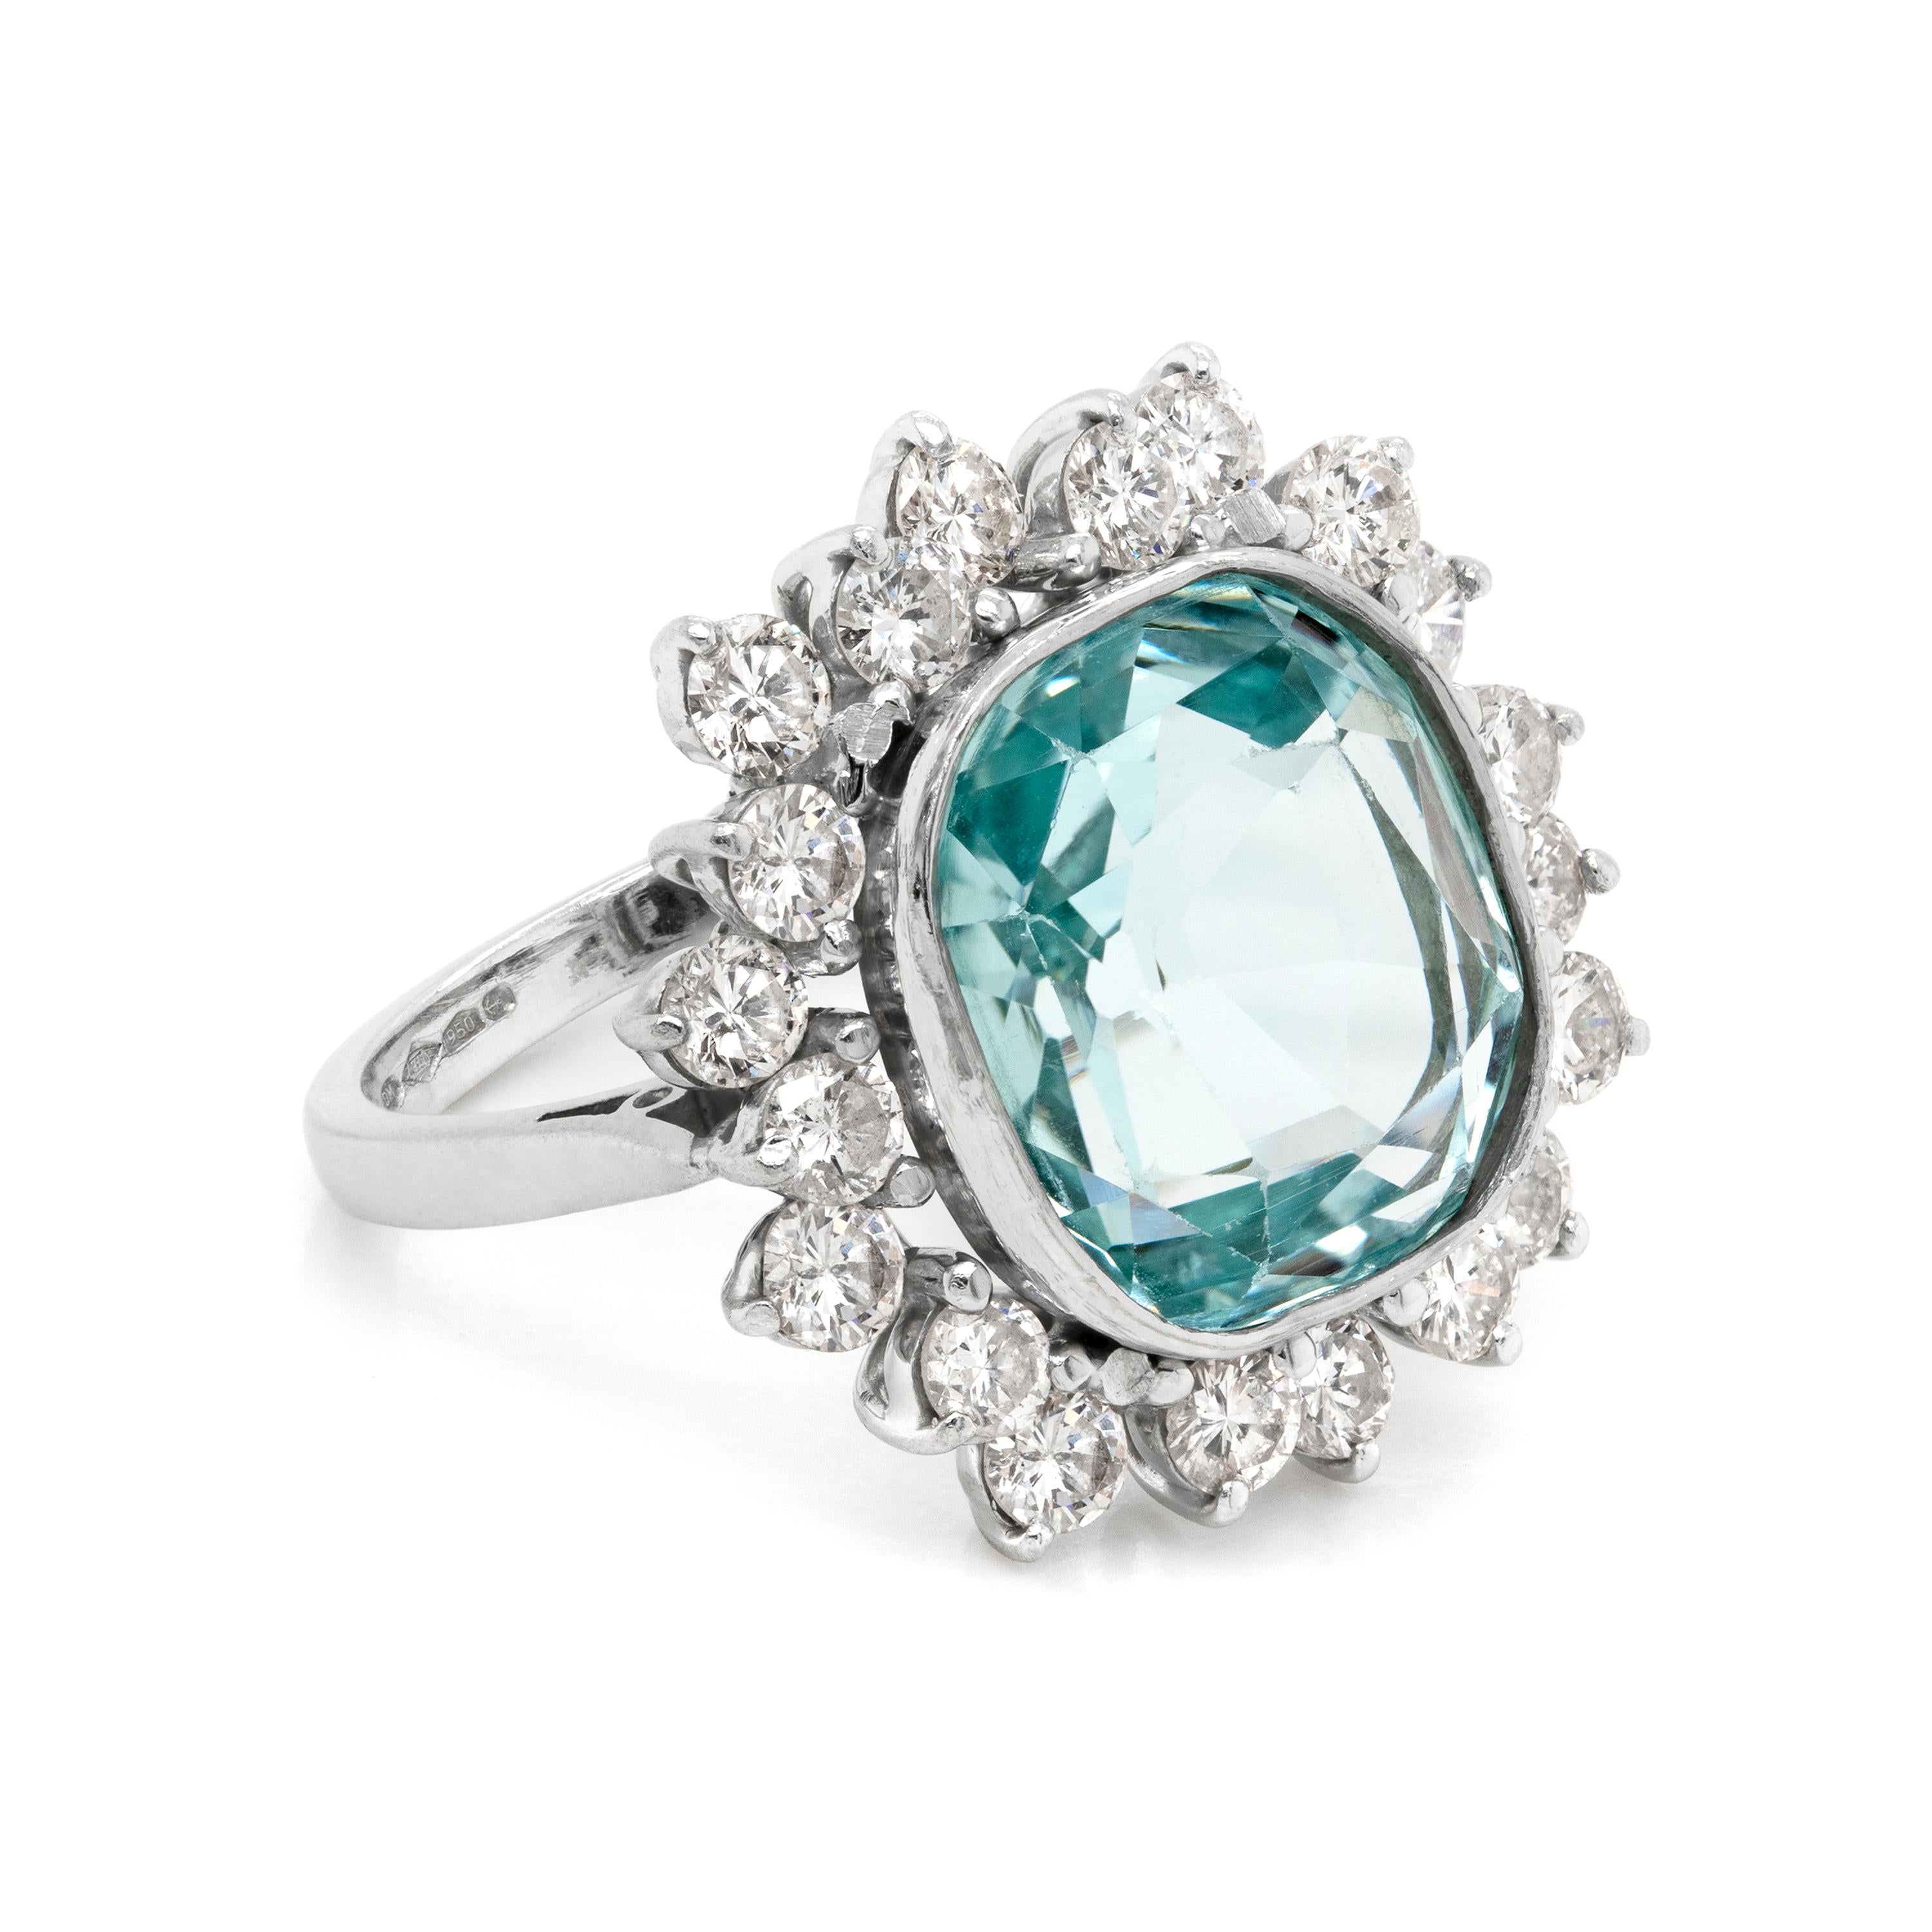 Incredible cluster ring featuring a cushion aquamarine, weighing approximately 4.50ct, mounted in a rubover, open back setting. The amazing aquamarine is beautifully surrounded by twenty round brilliant cut diamonds, weighing a total approximate